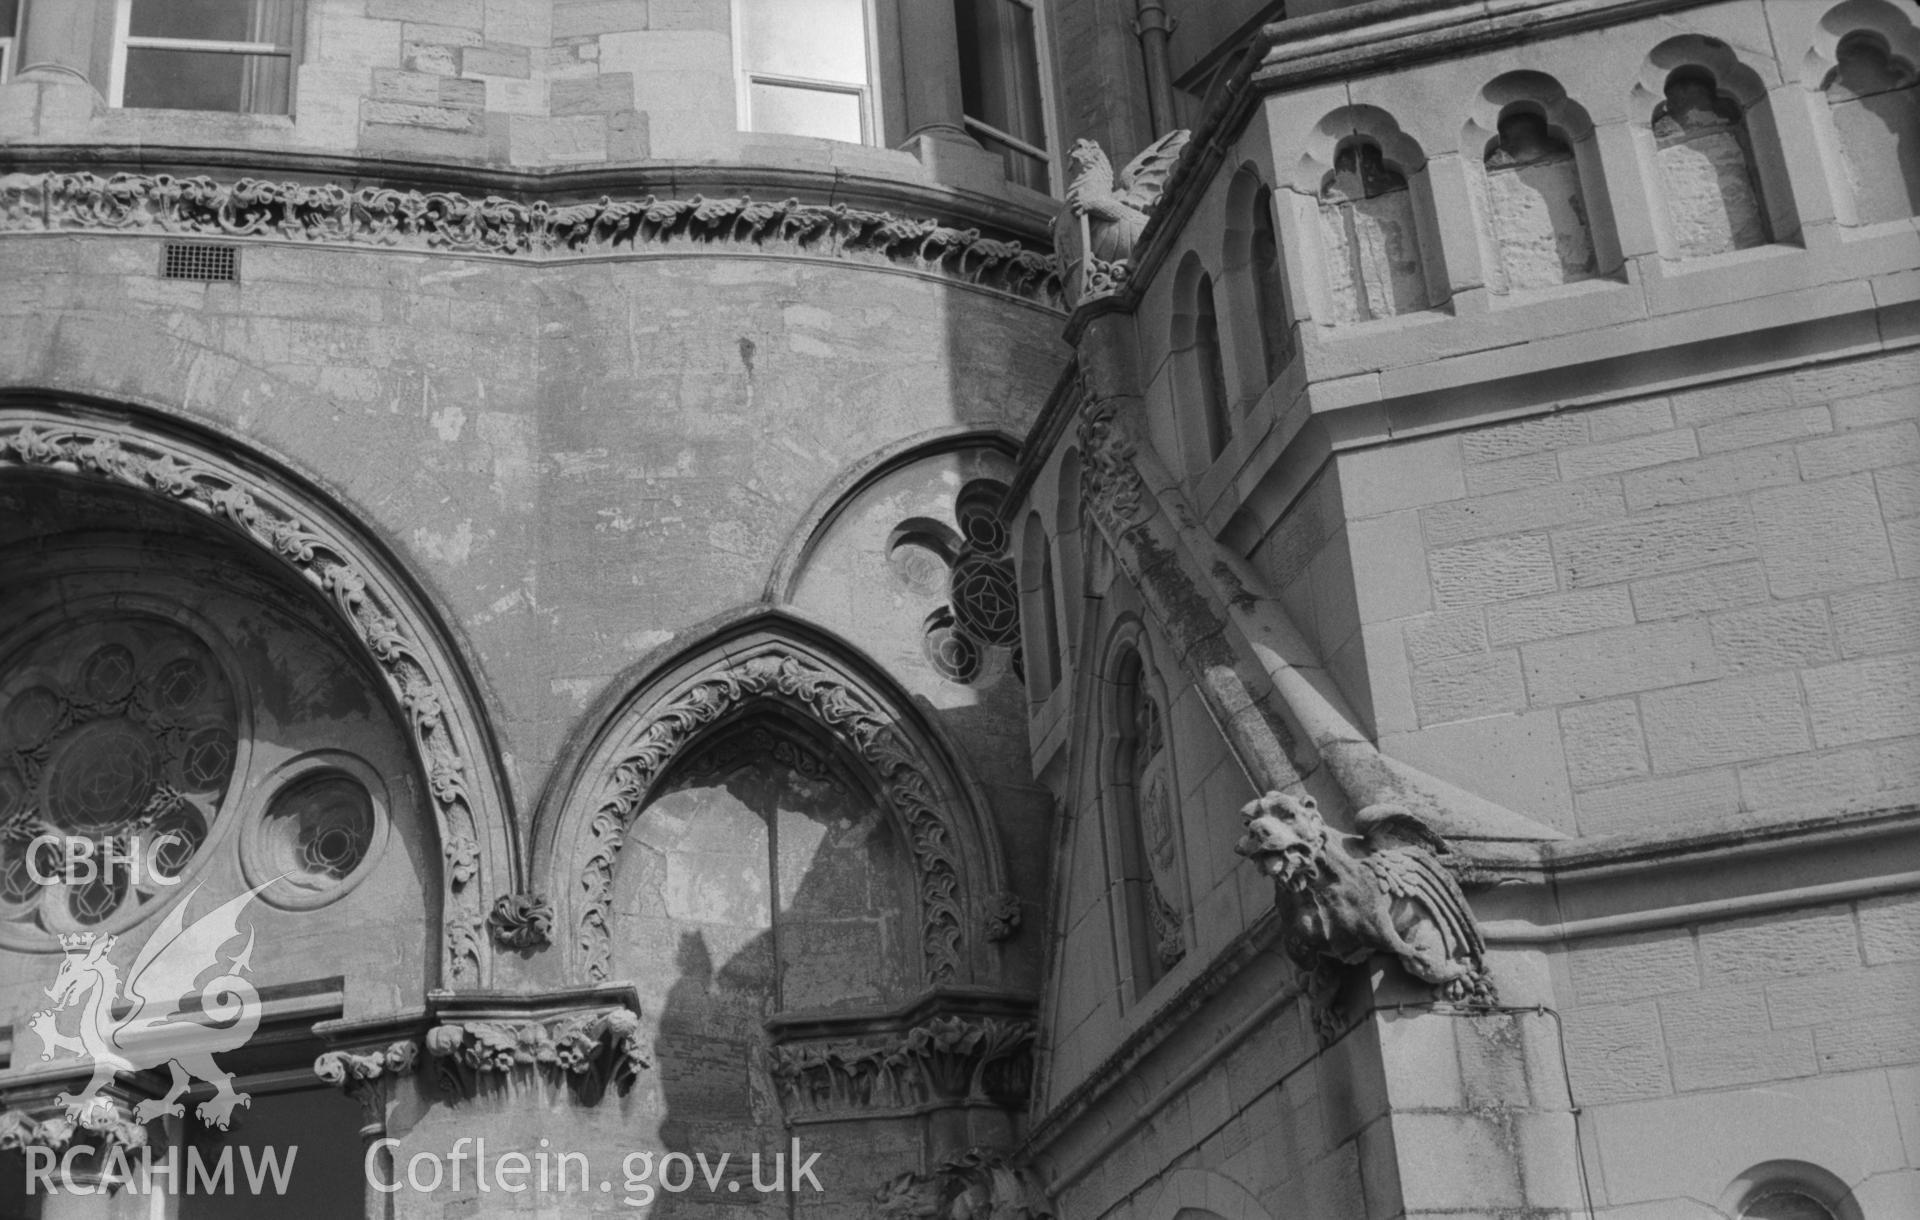 Digital copy of a black and white negative showing detail of the north west facing side of the Old College, on Aberystwyth promenade. Photographed by Arthur O. Chater on 15th August 1967 from Grid Reference SN 581 817.